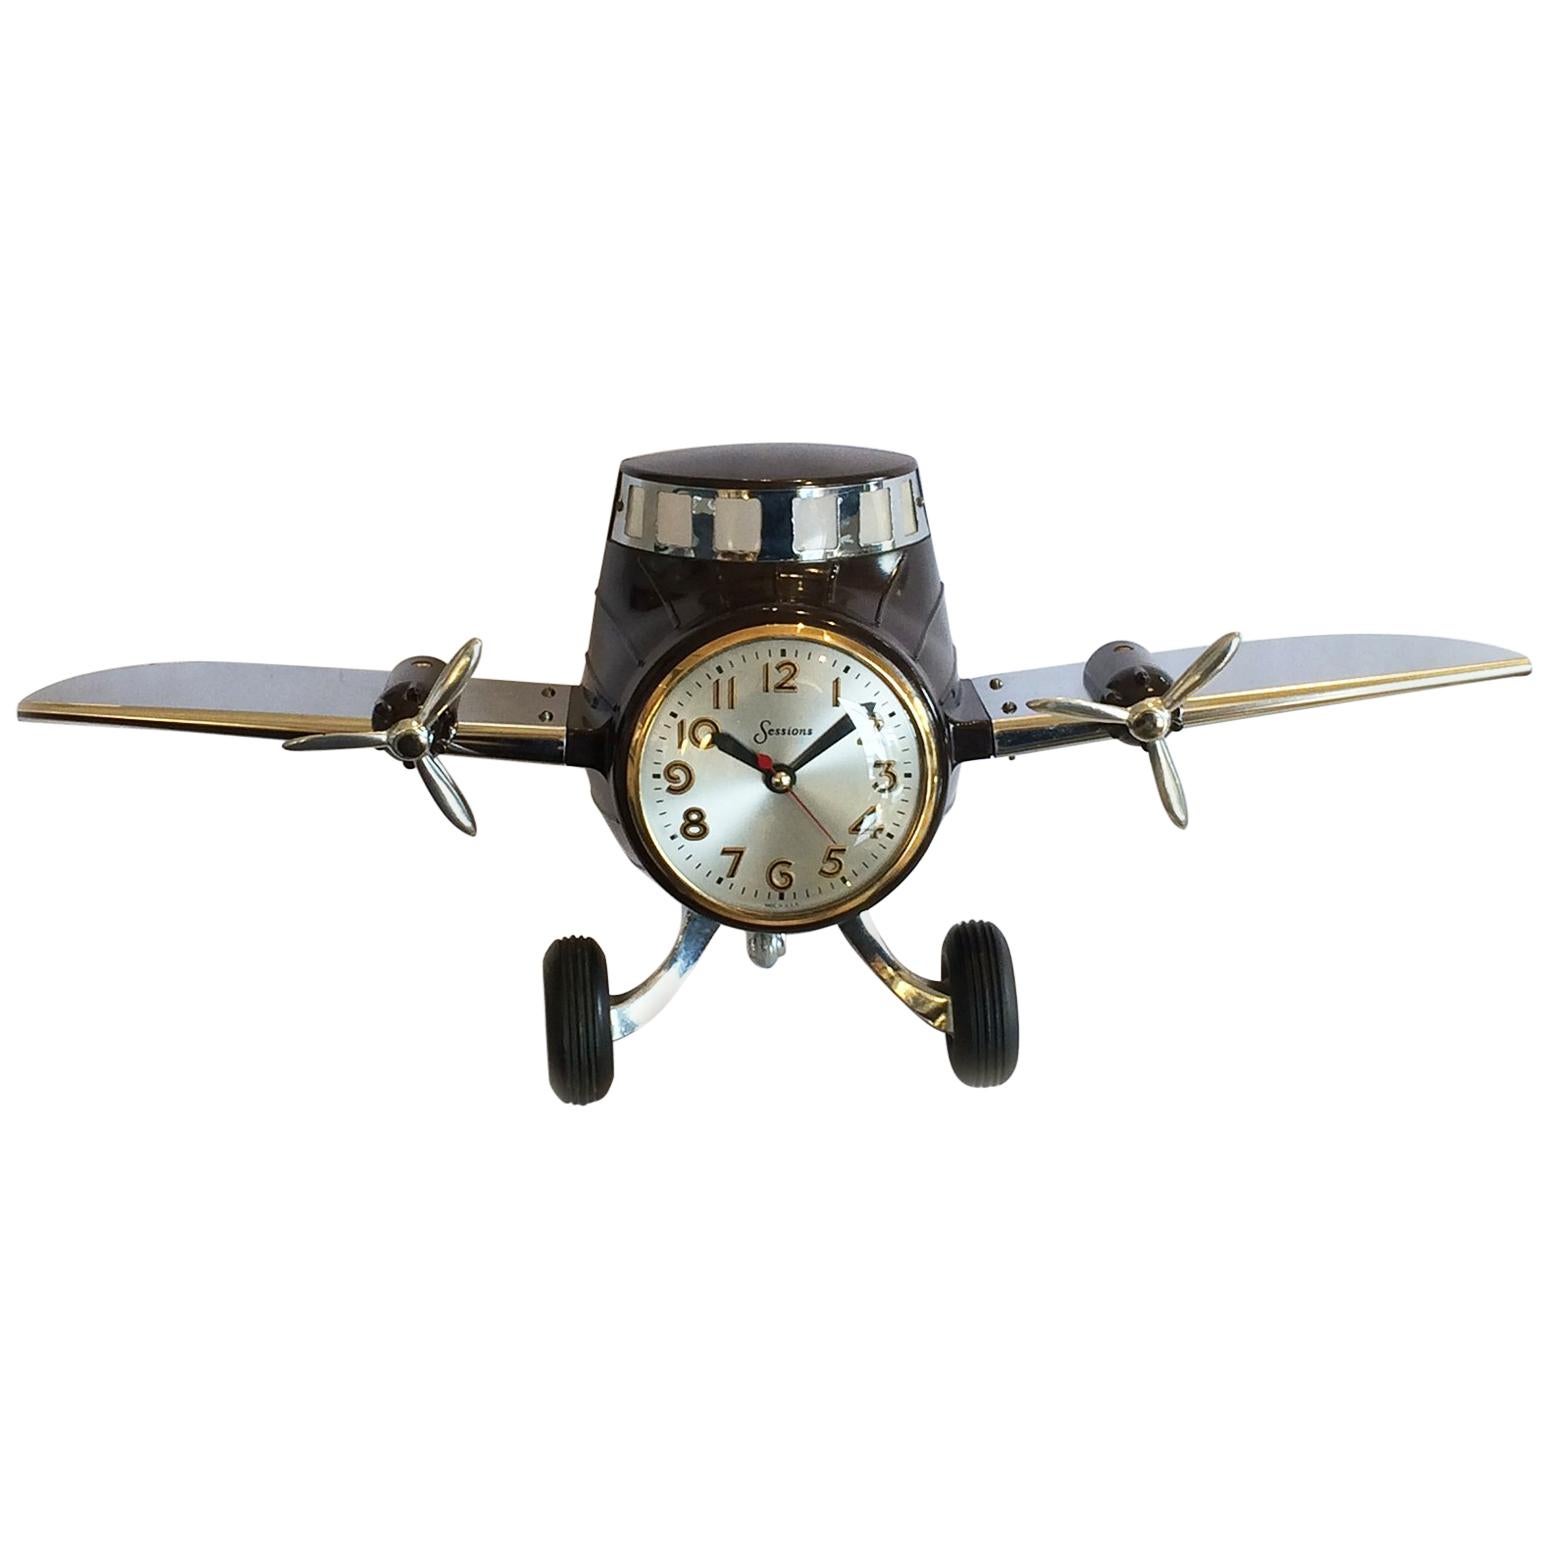 Art Deco Airplane Aeroplane Clock in Bakelite and Chrome by Sessions For Sale